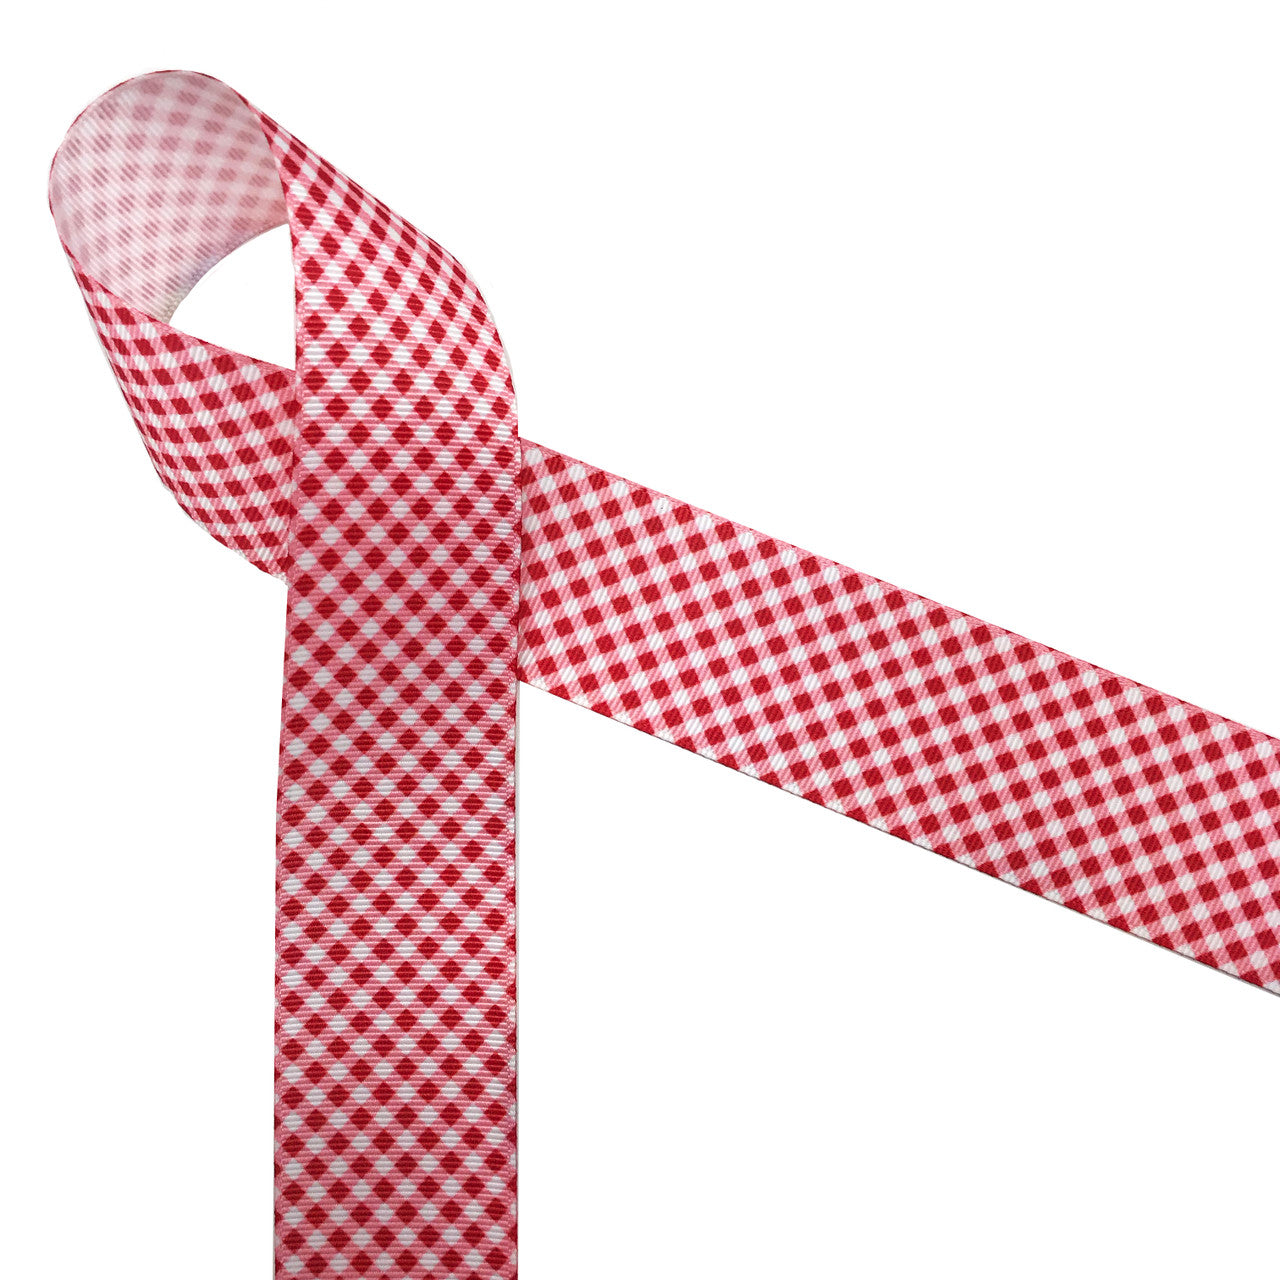 Red and white gingham check printed on 1.5" white grosgrain ribbon is a classic design perfect for so many craft projects, events and gifts! Be sure to have this ribbon on hand for all your creative moments! Designed and printed in the USA